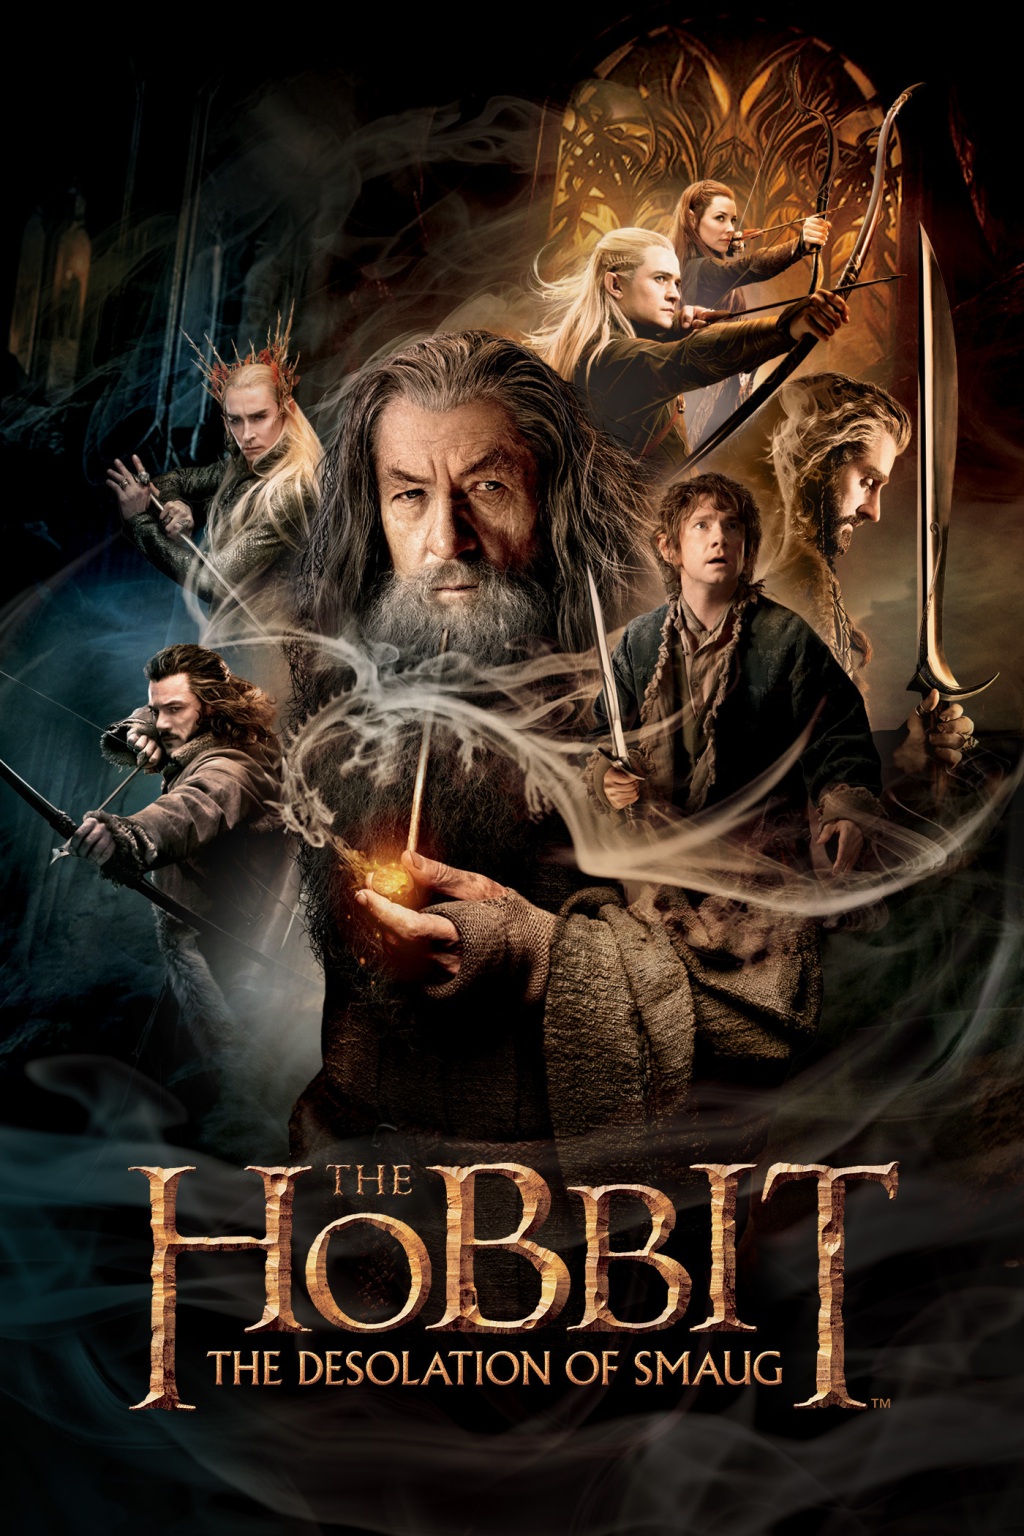 The Hobbit: The Desolation of Smaug, not as good as the first and certainly not as good as LOTR